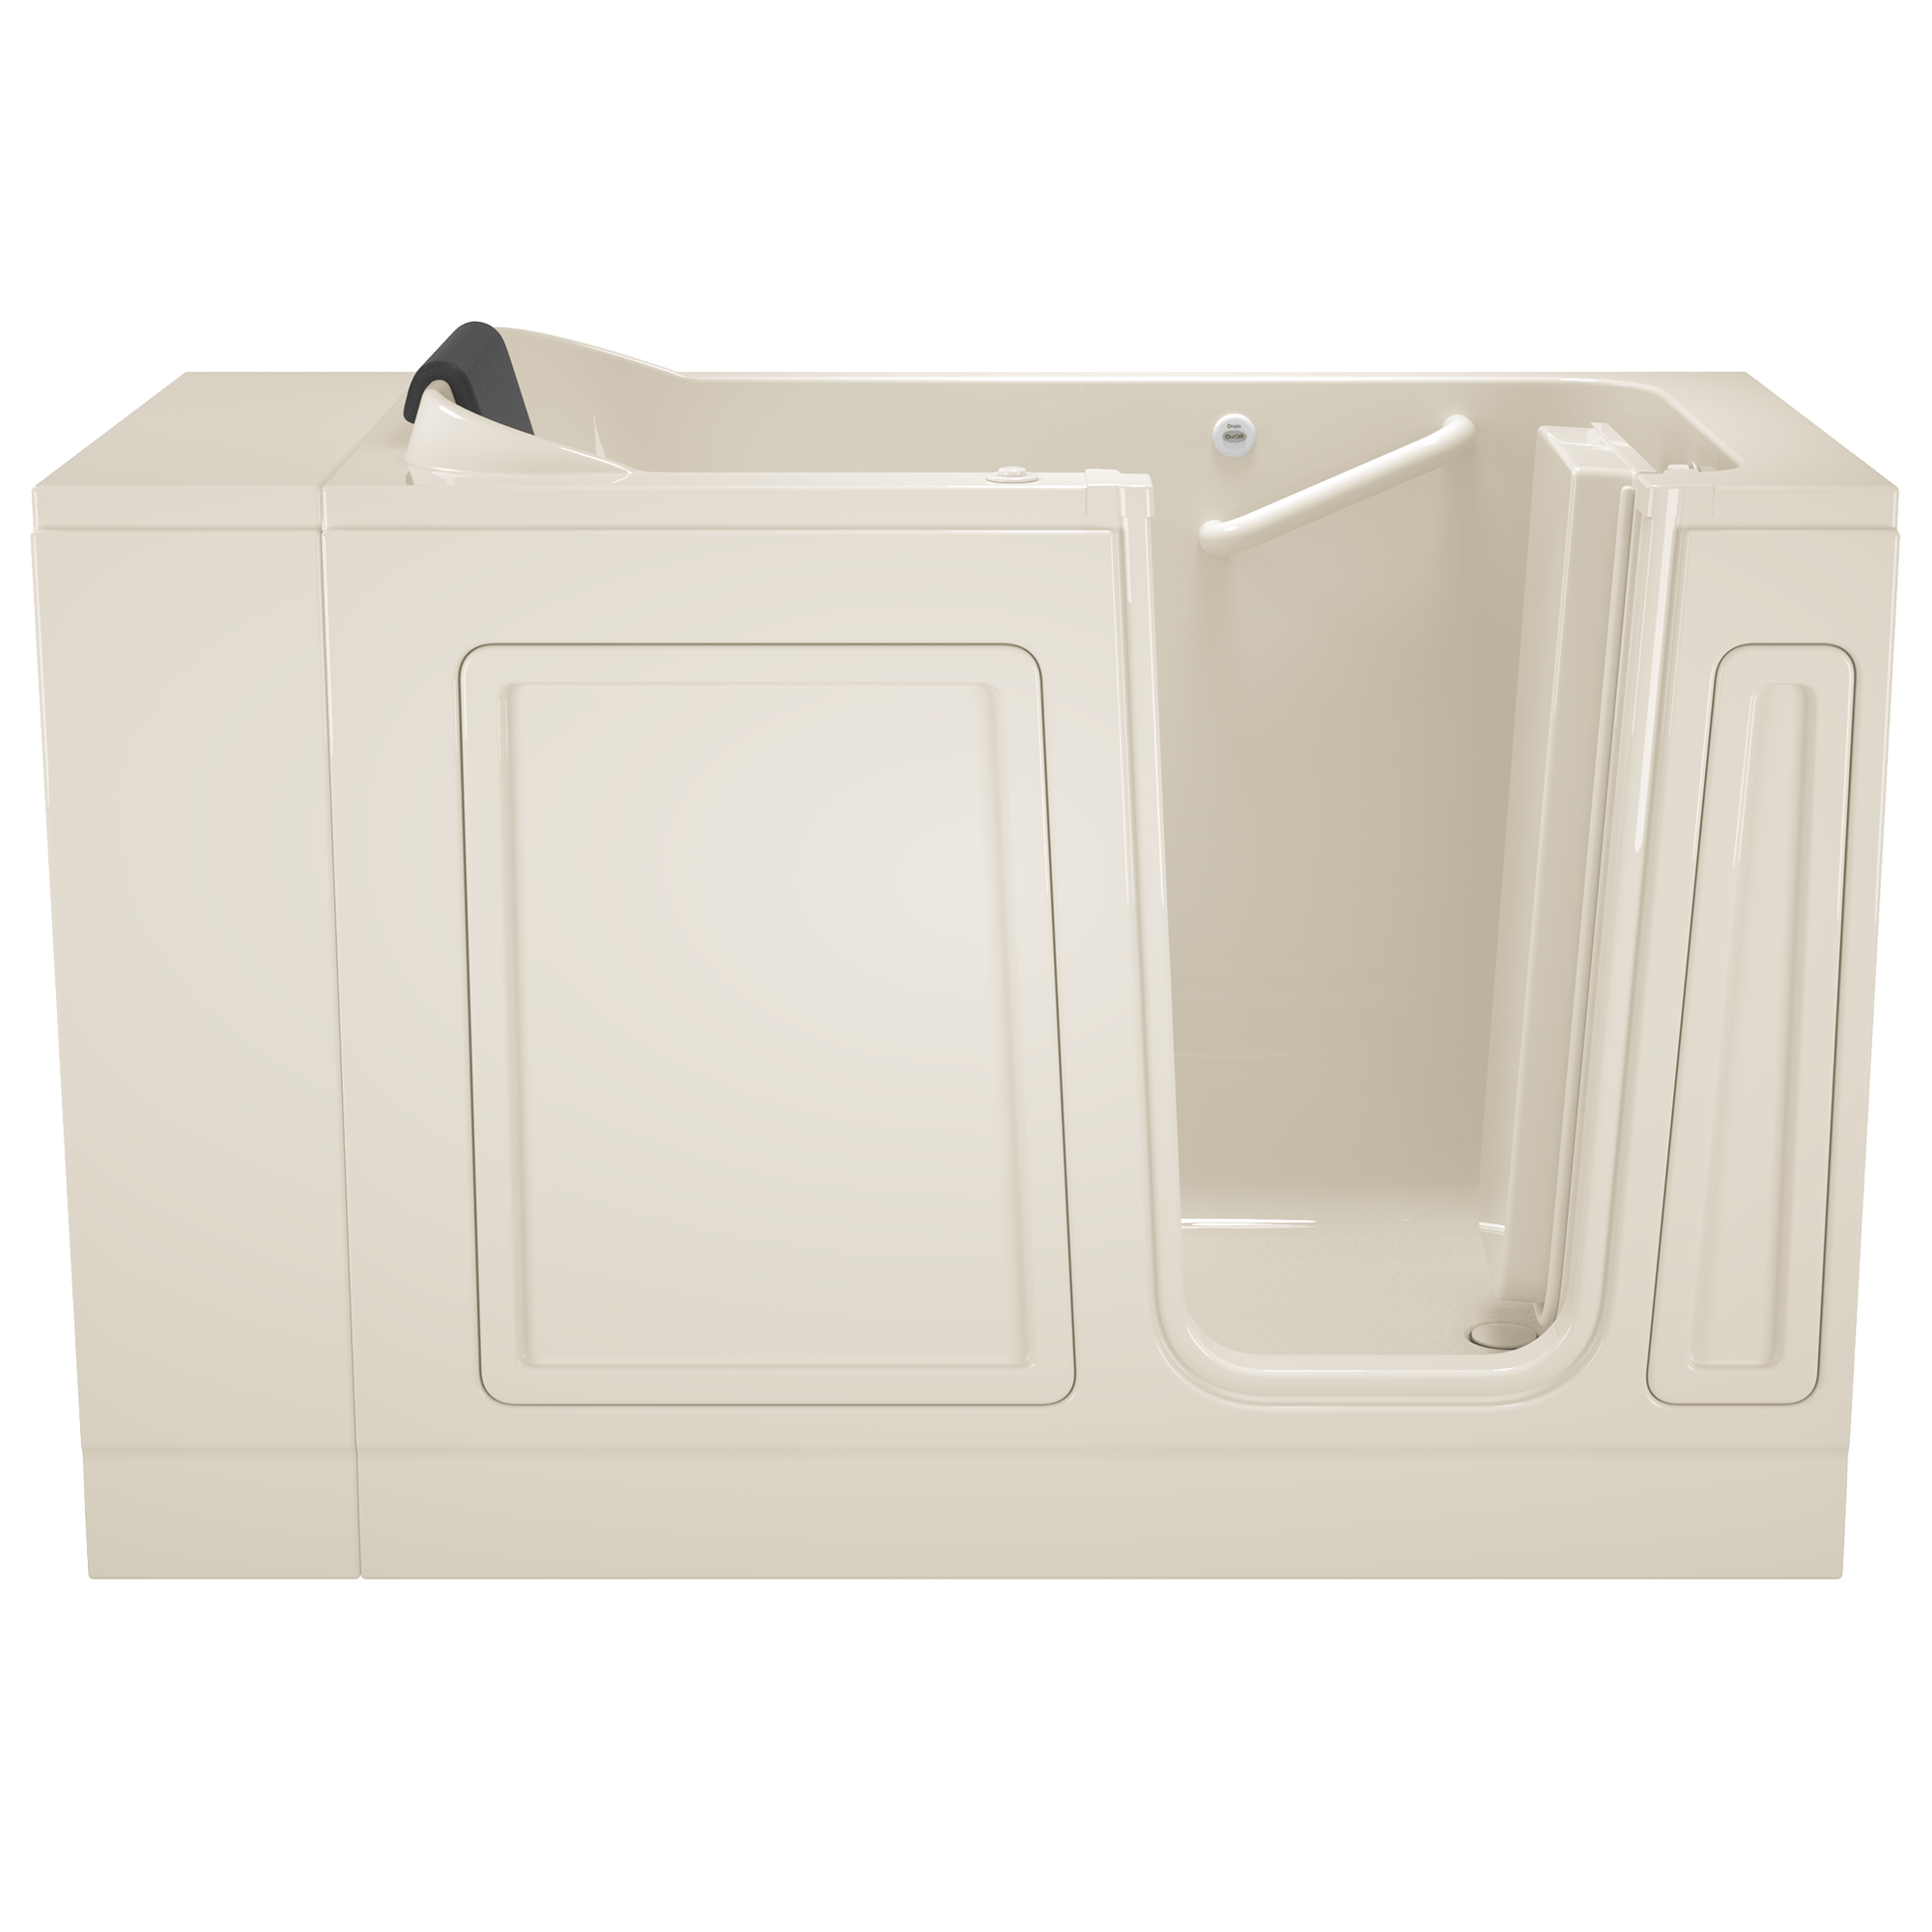 Acrylic Luxury Series 28 x 48 Inch Walk in Tub With Air Spa System   Right Hand Drain WIB LINEN